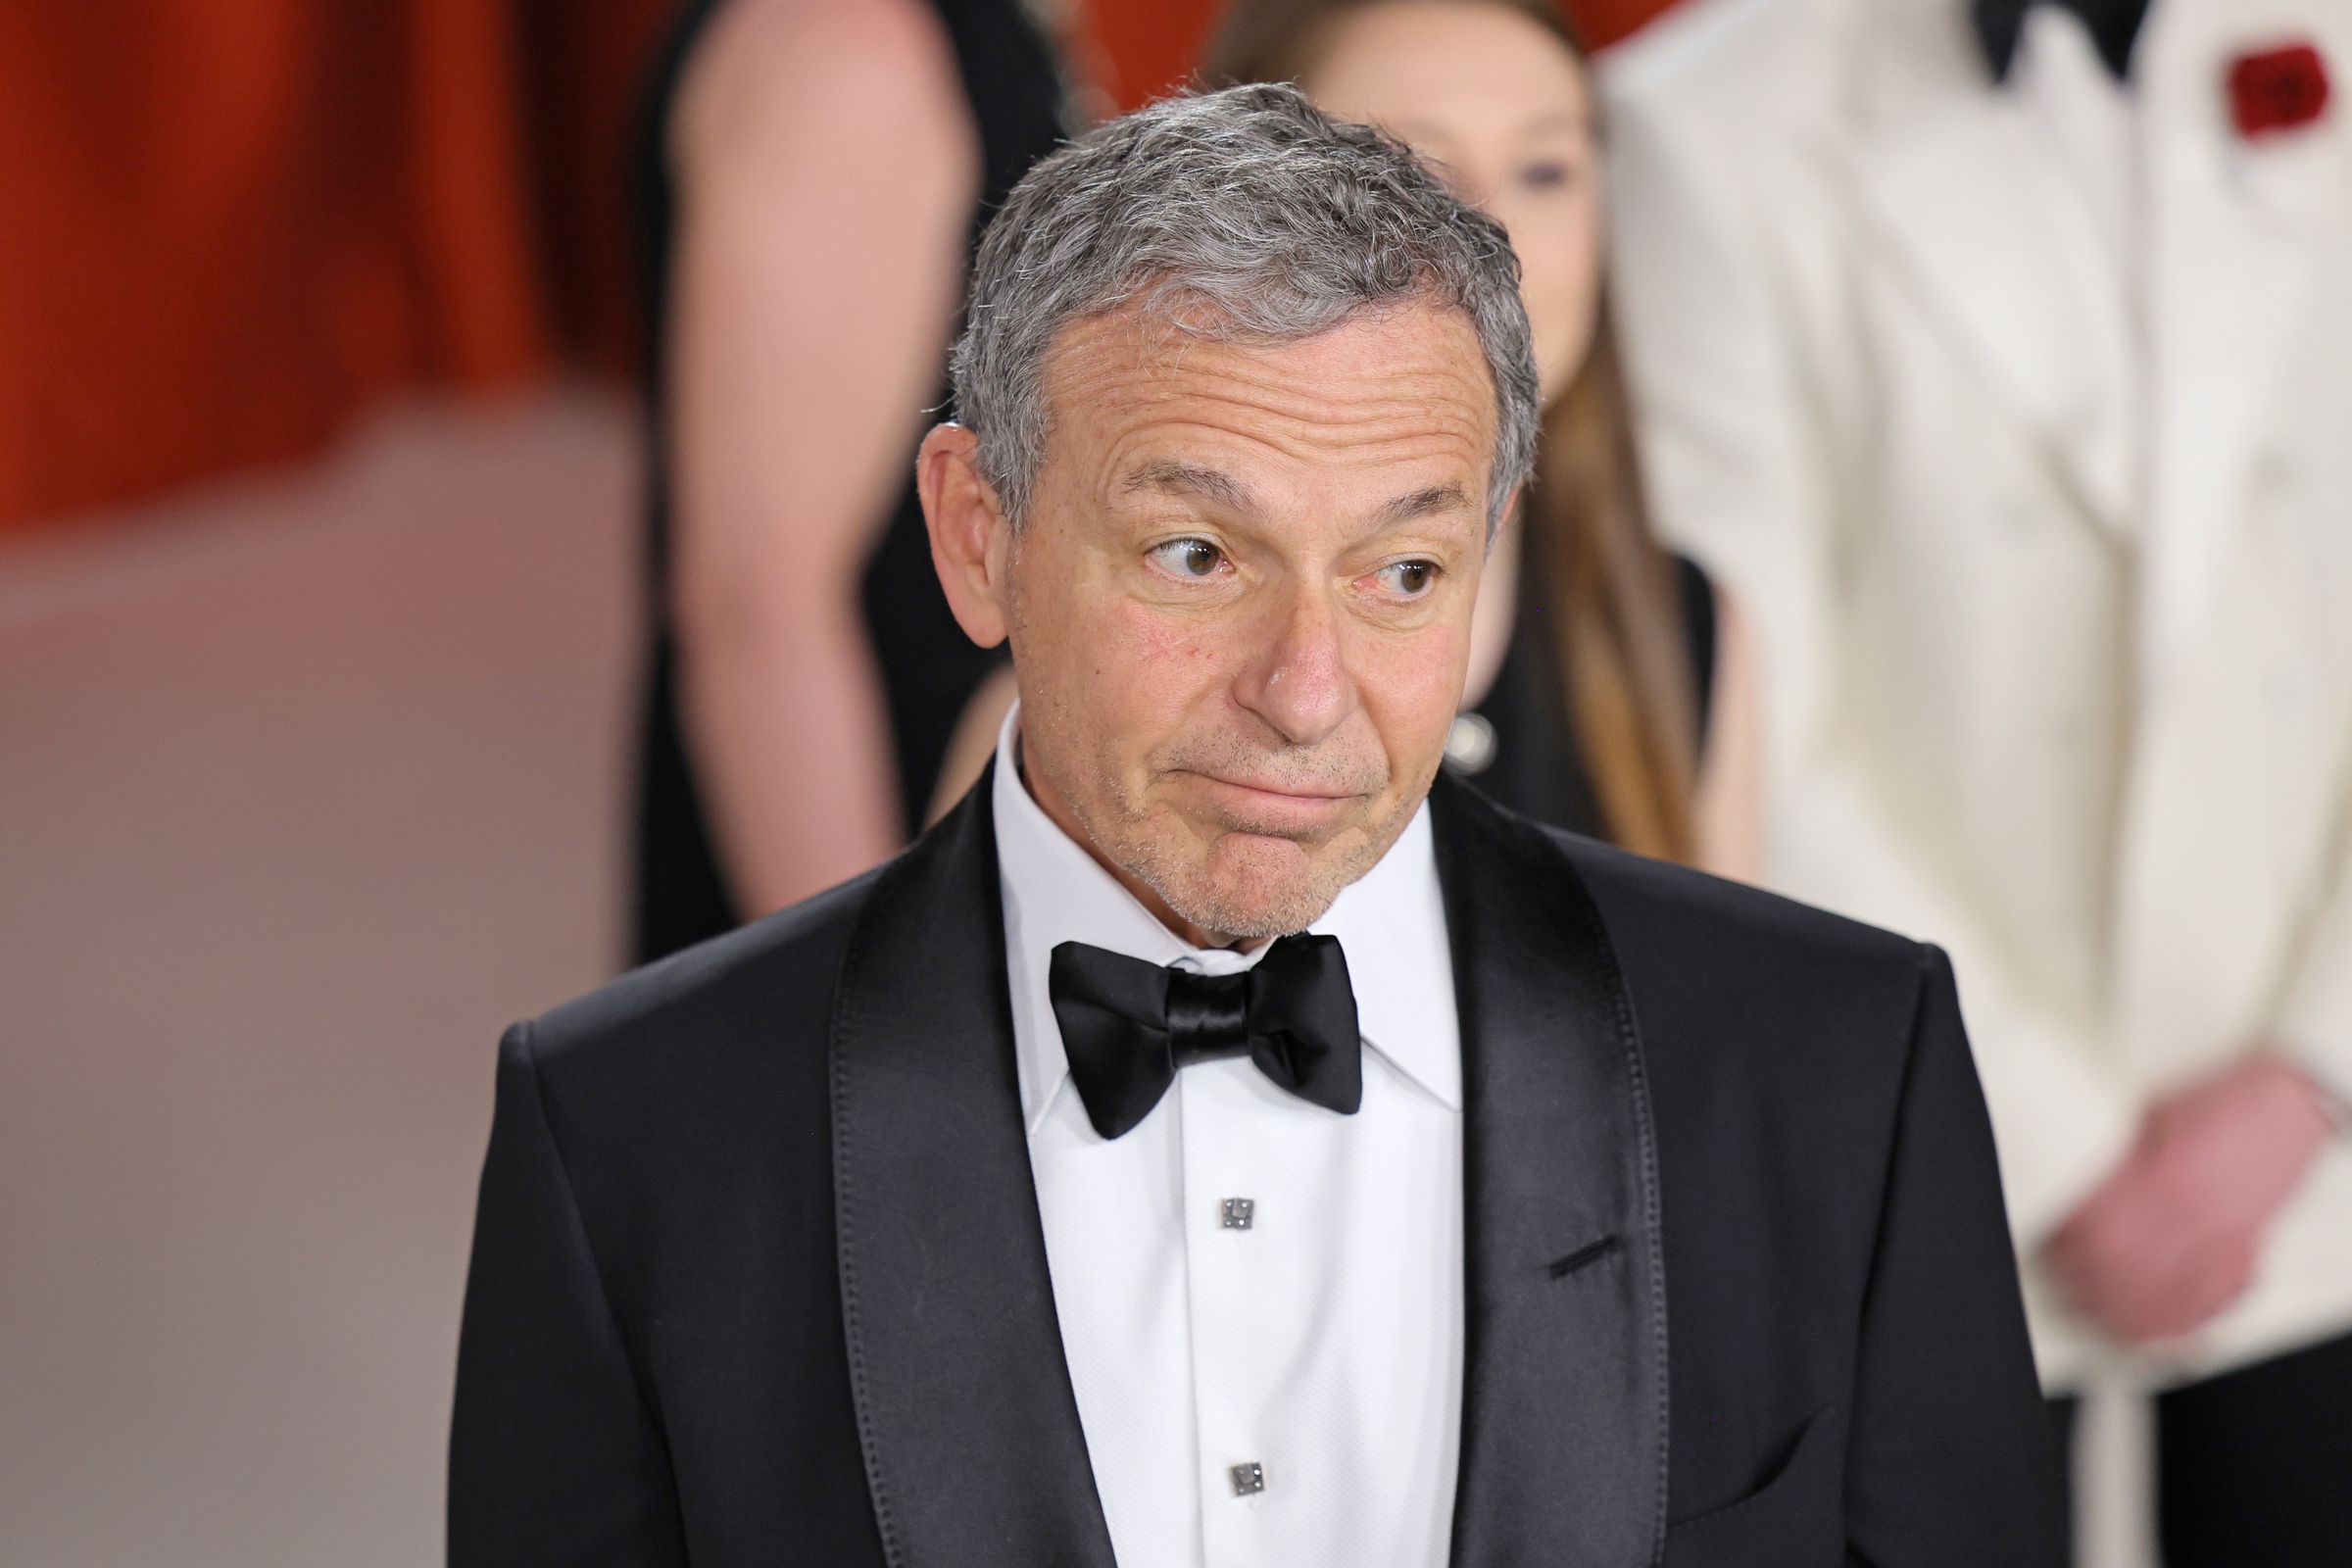 A photo showing Bob Iger at the 95th Annual Academy Awards